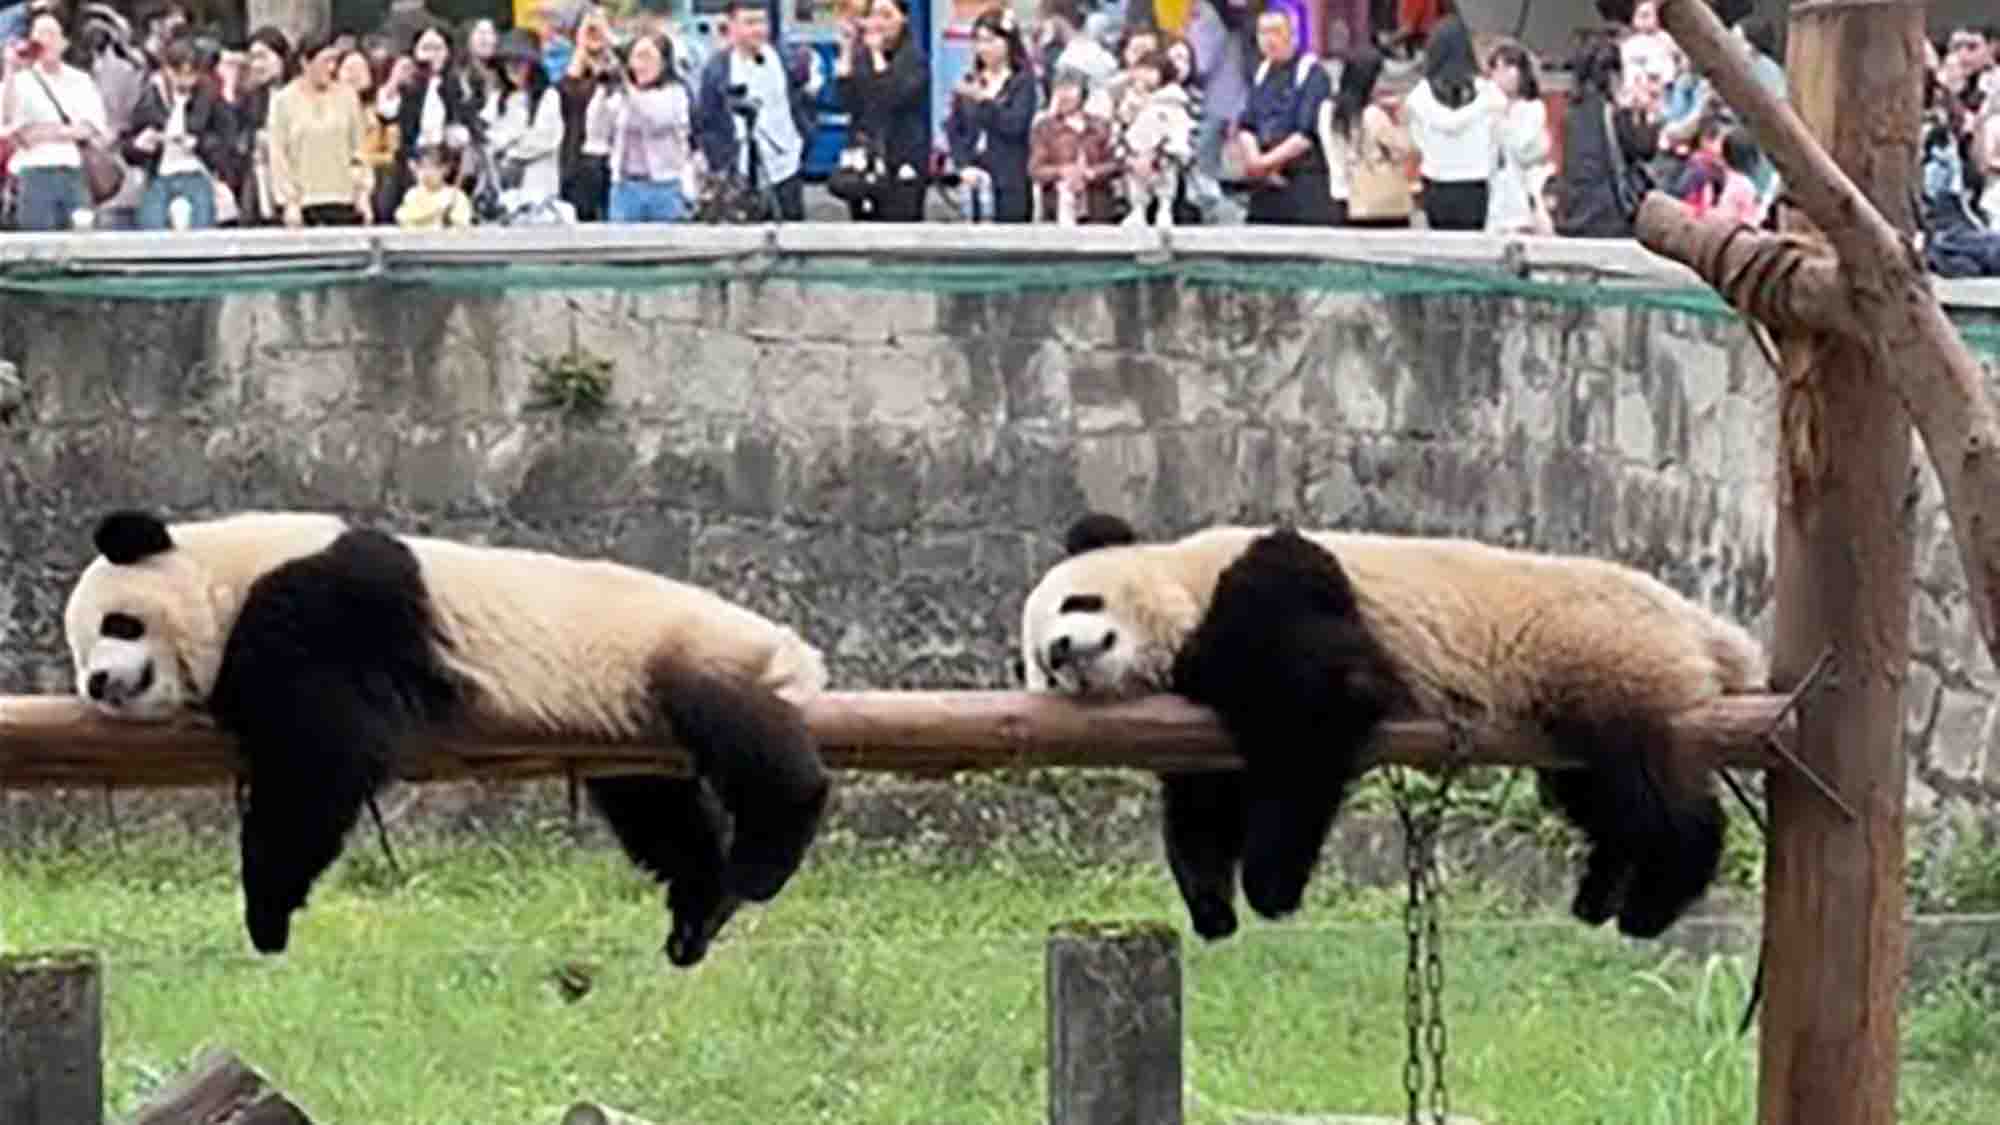 Cute Pandas Look Like Copy Paste Images Of Each Other As They Doze on Pole